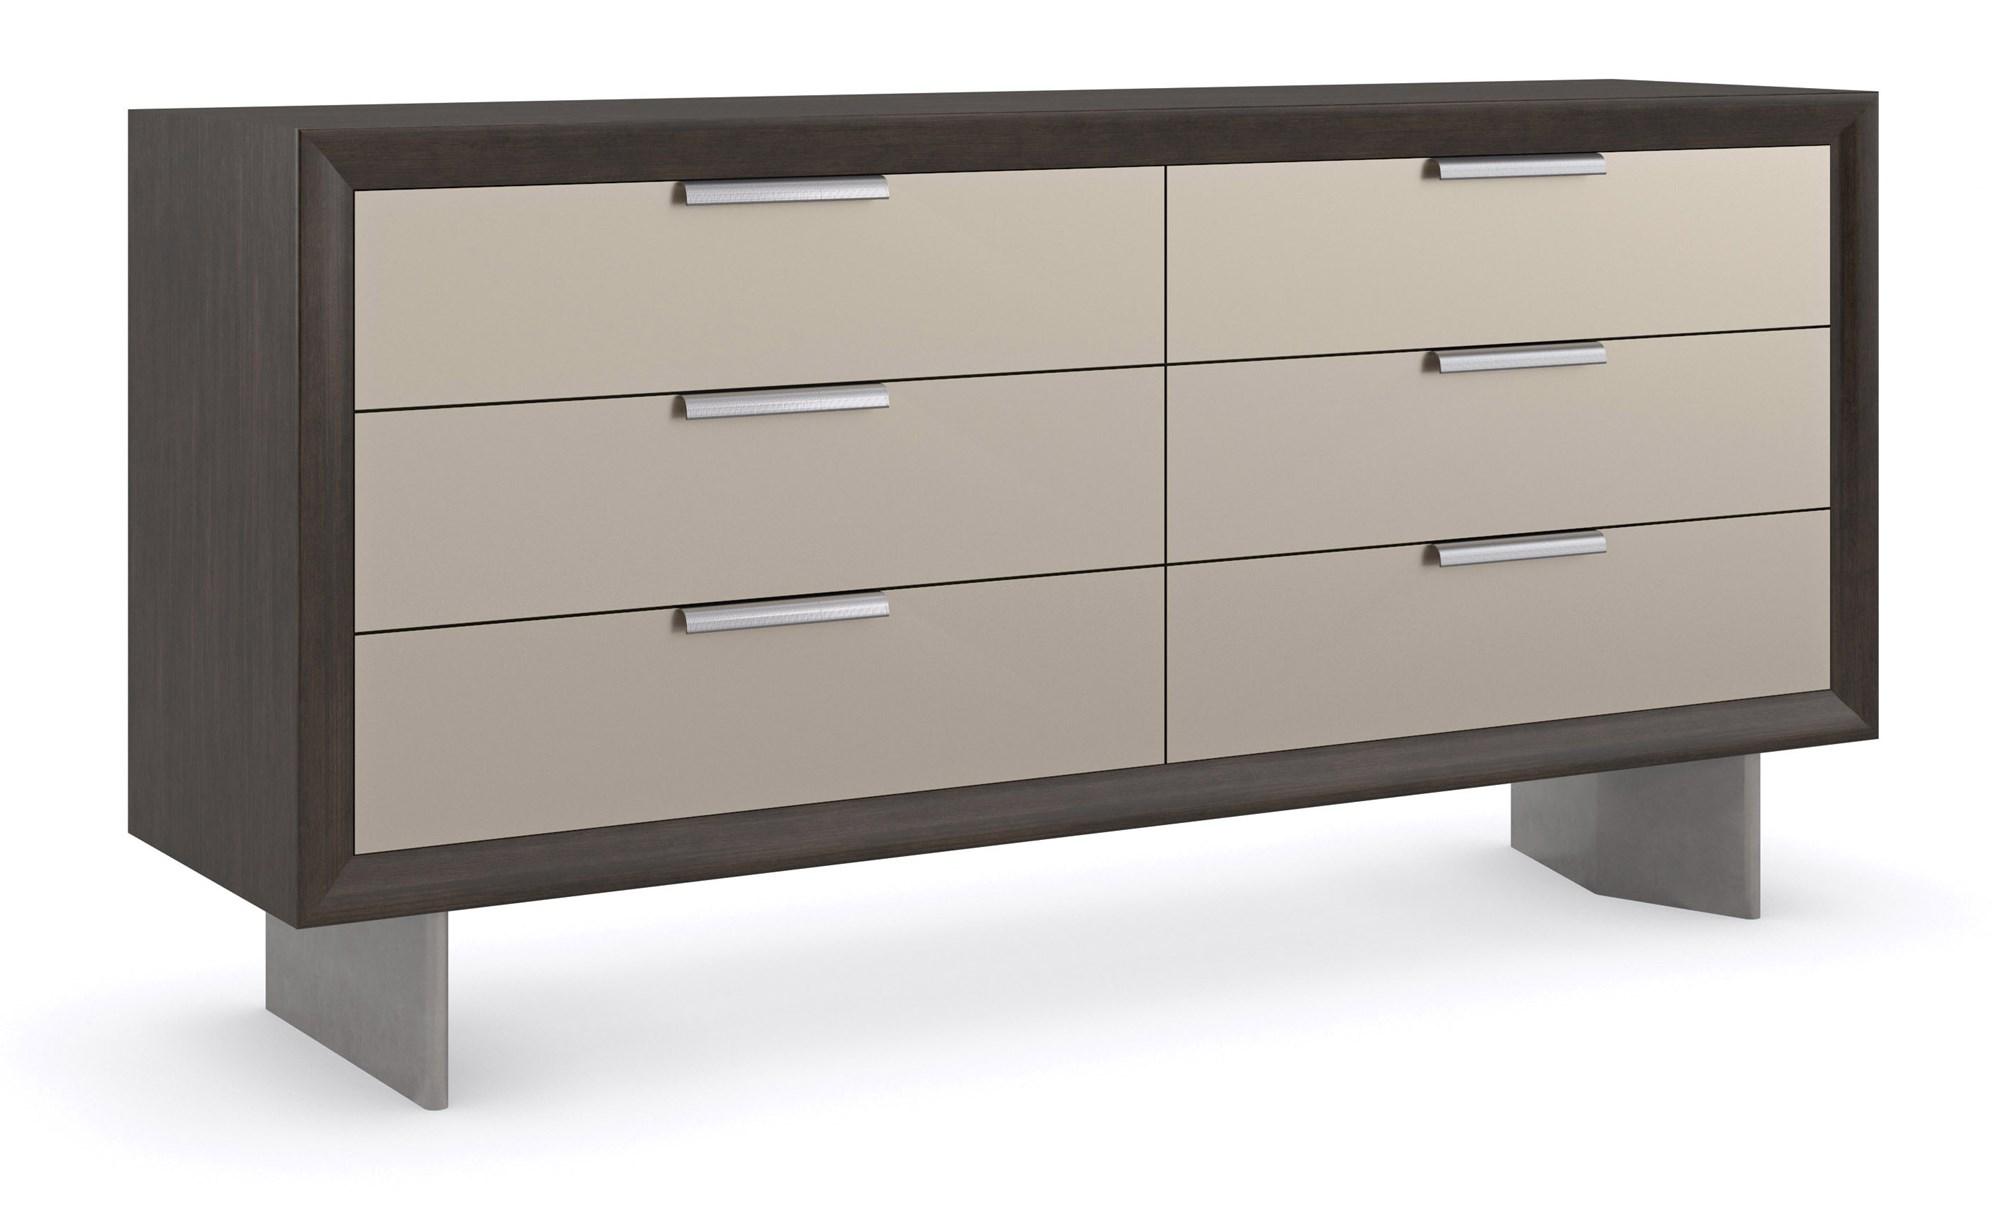 

    
Sepia & Smoked Stainless Steel Paint Finish LA MODA DRESSER W/ Mirror by Caracole
